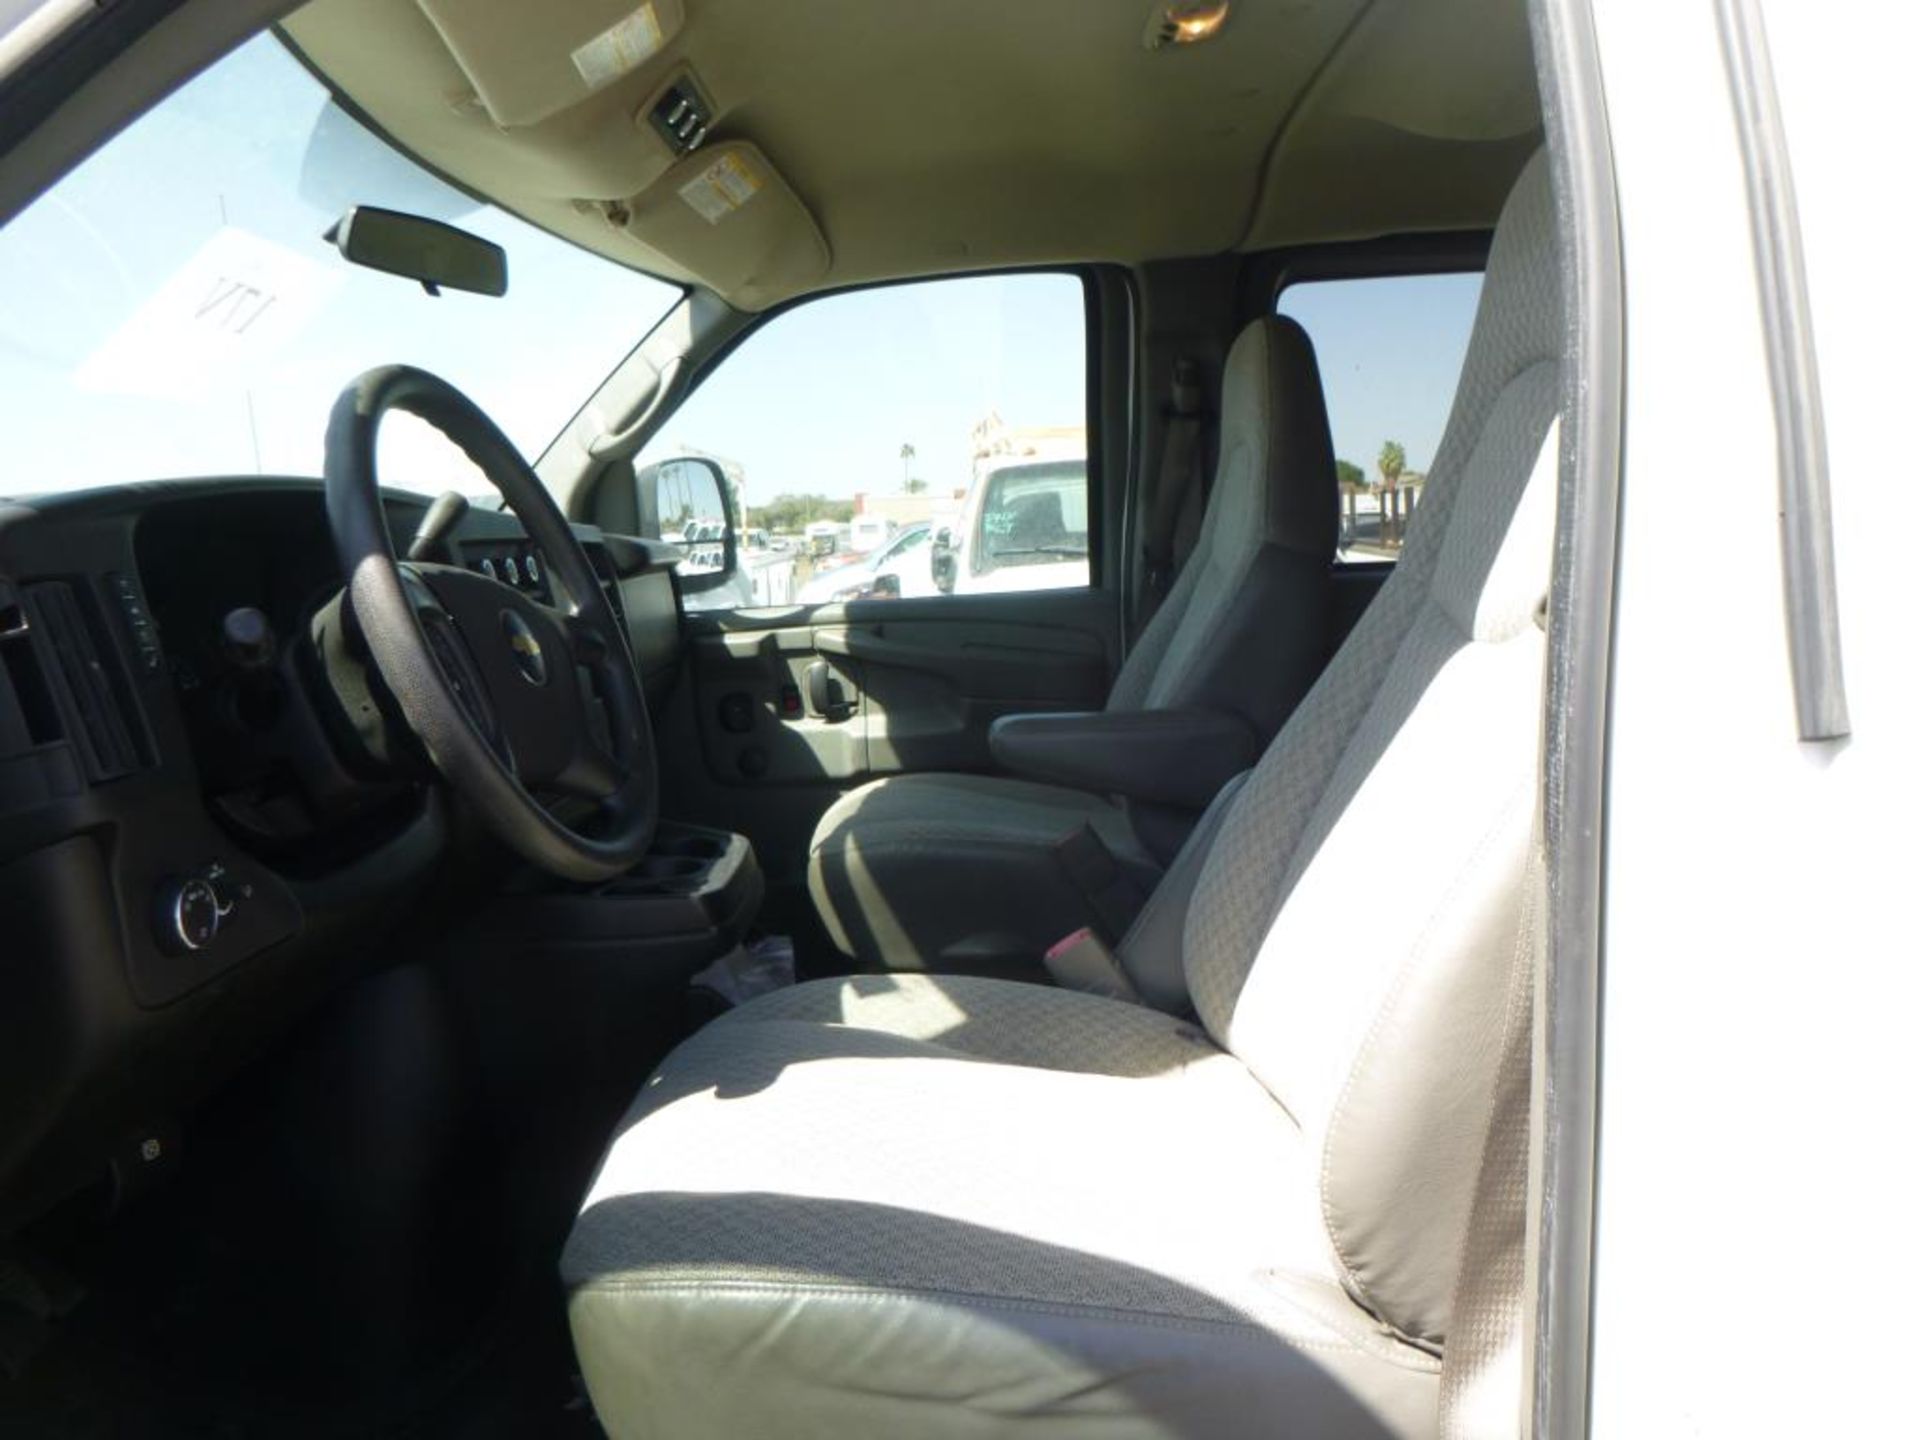 2008 Chevrolet Express - Image 10 of 14